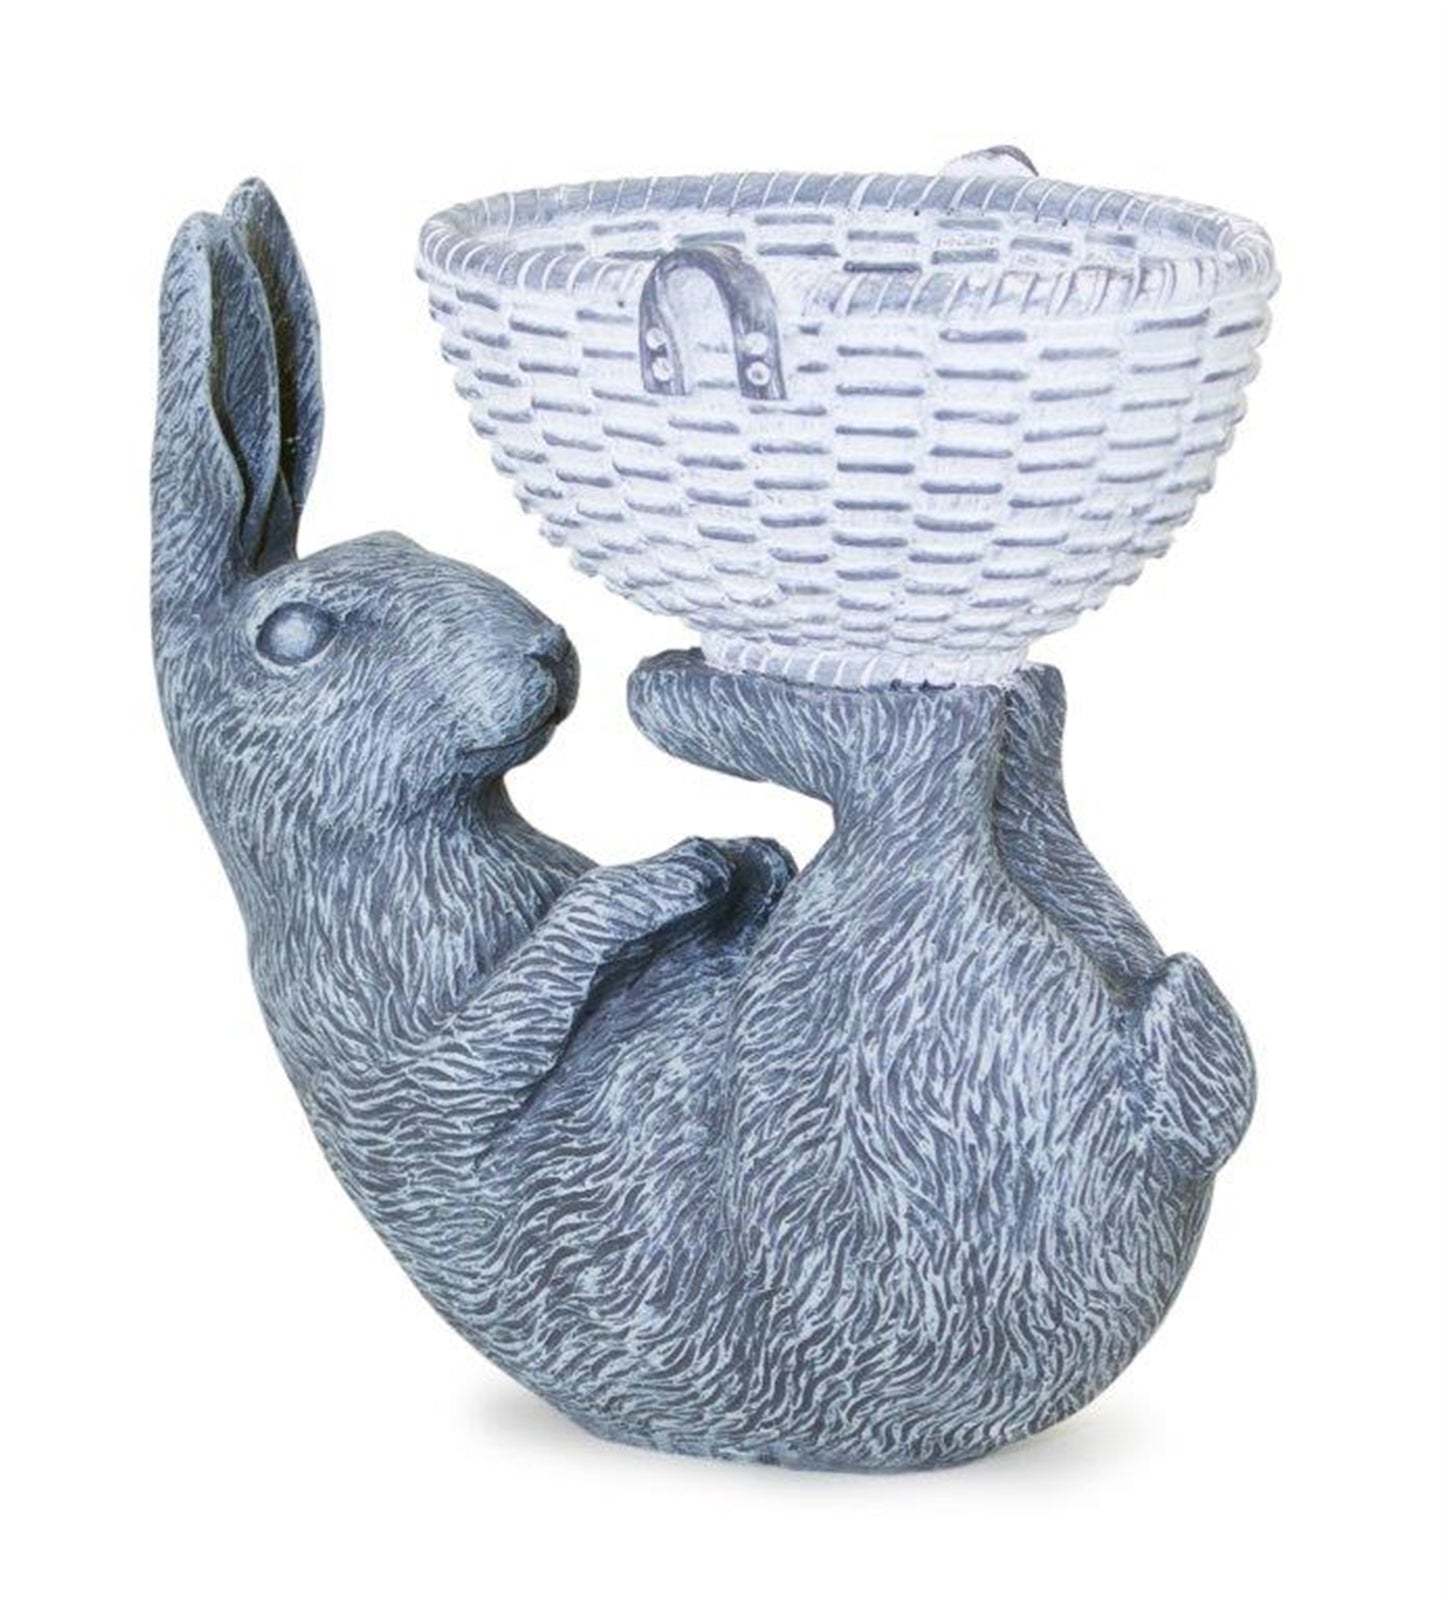 Laying Rabbit Figurine with Basket Accent 10.5"H